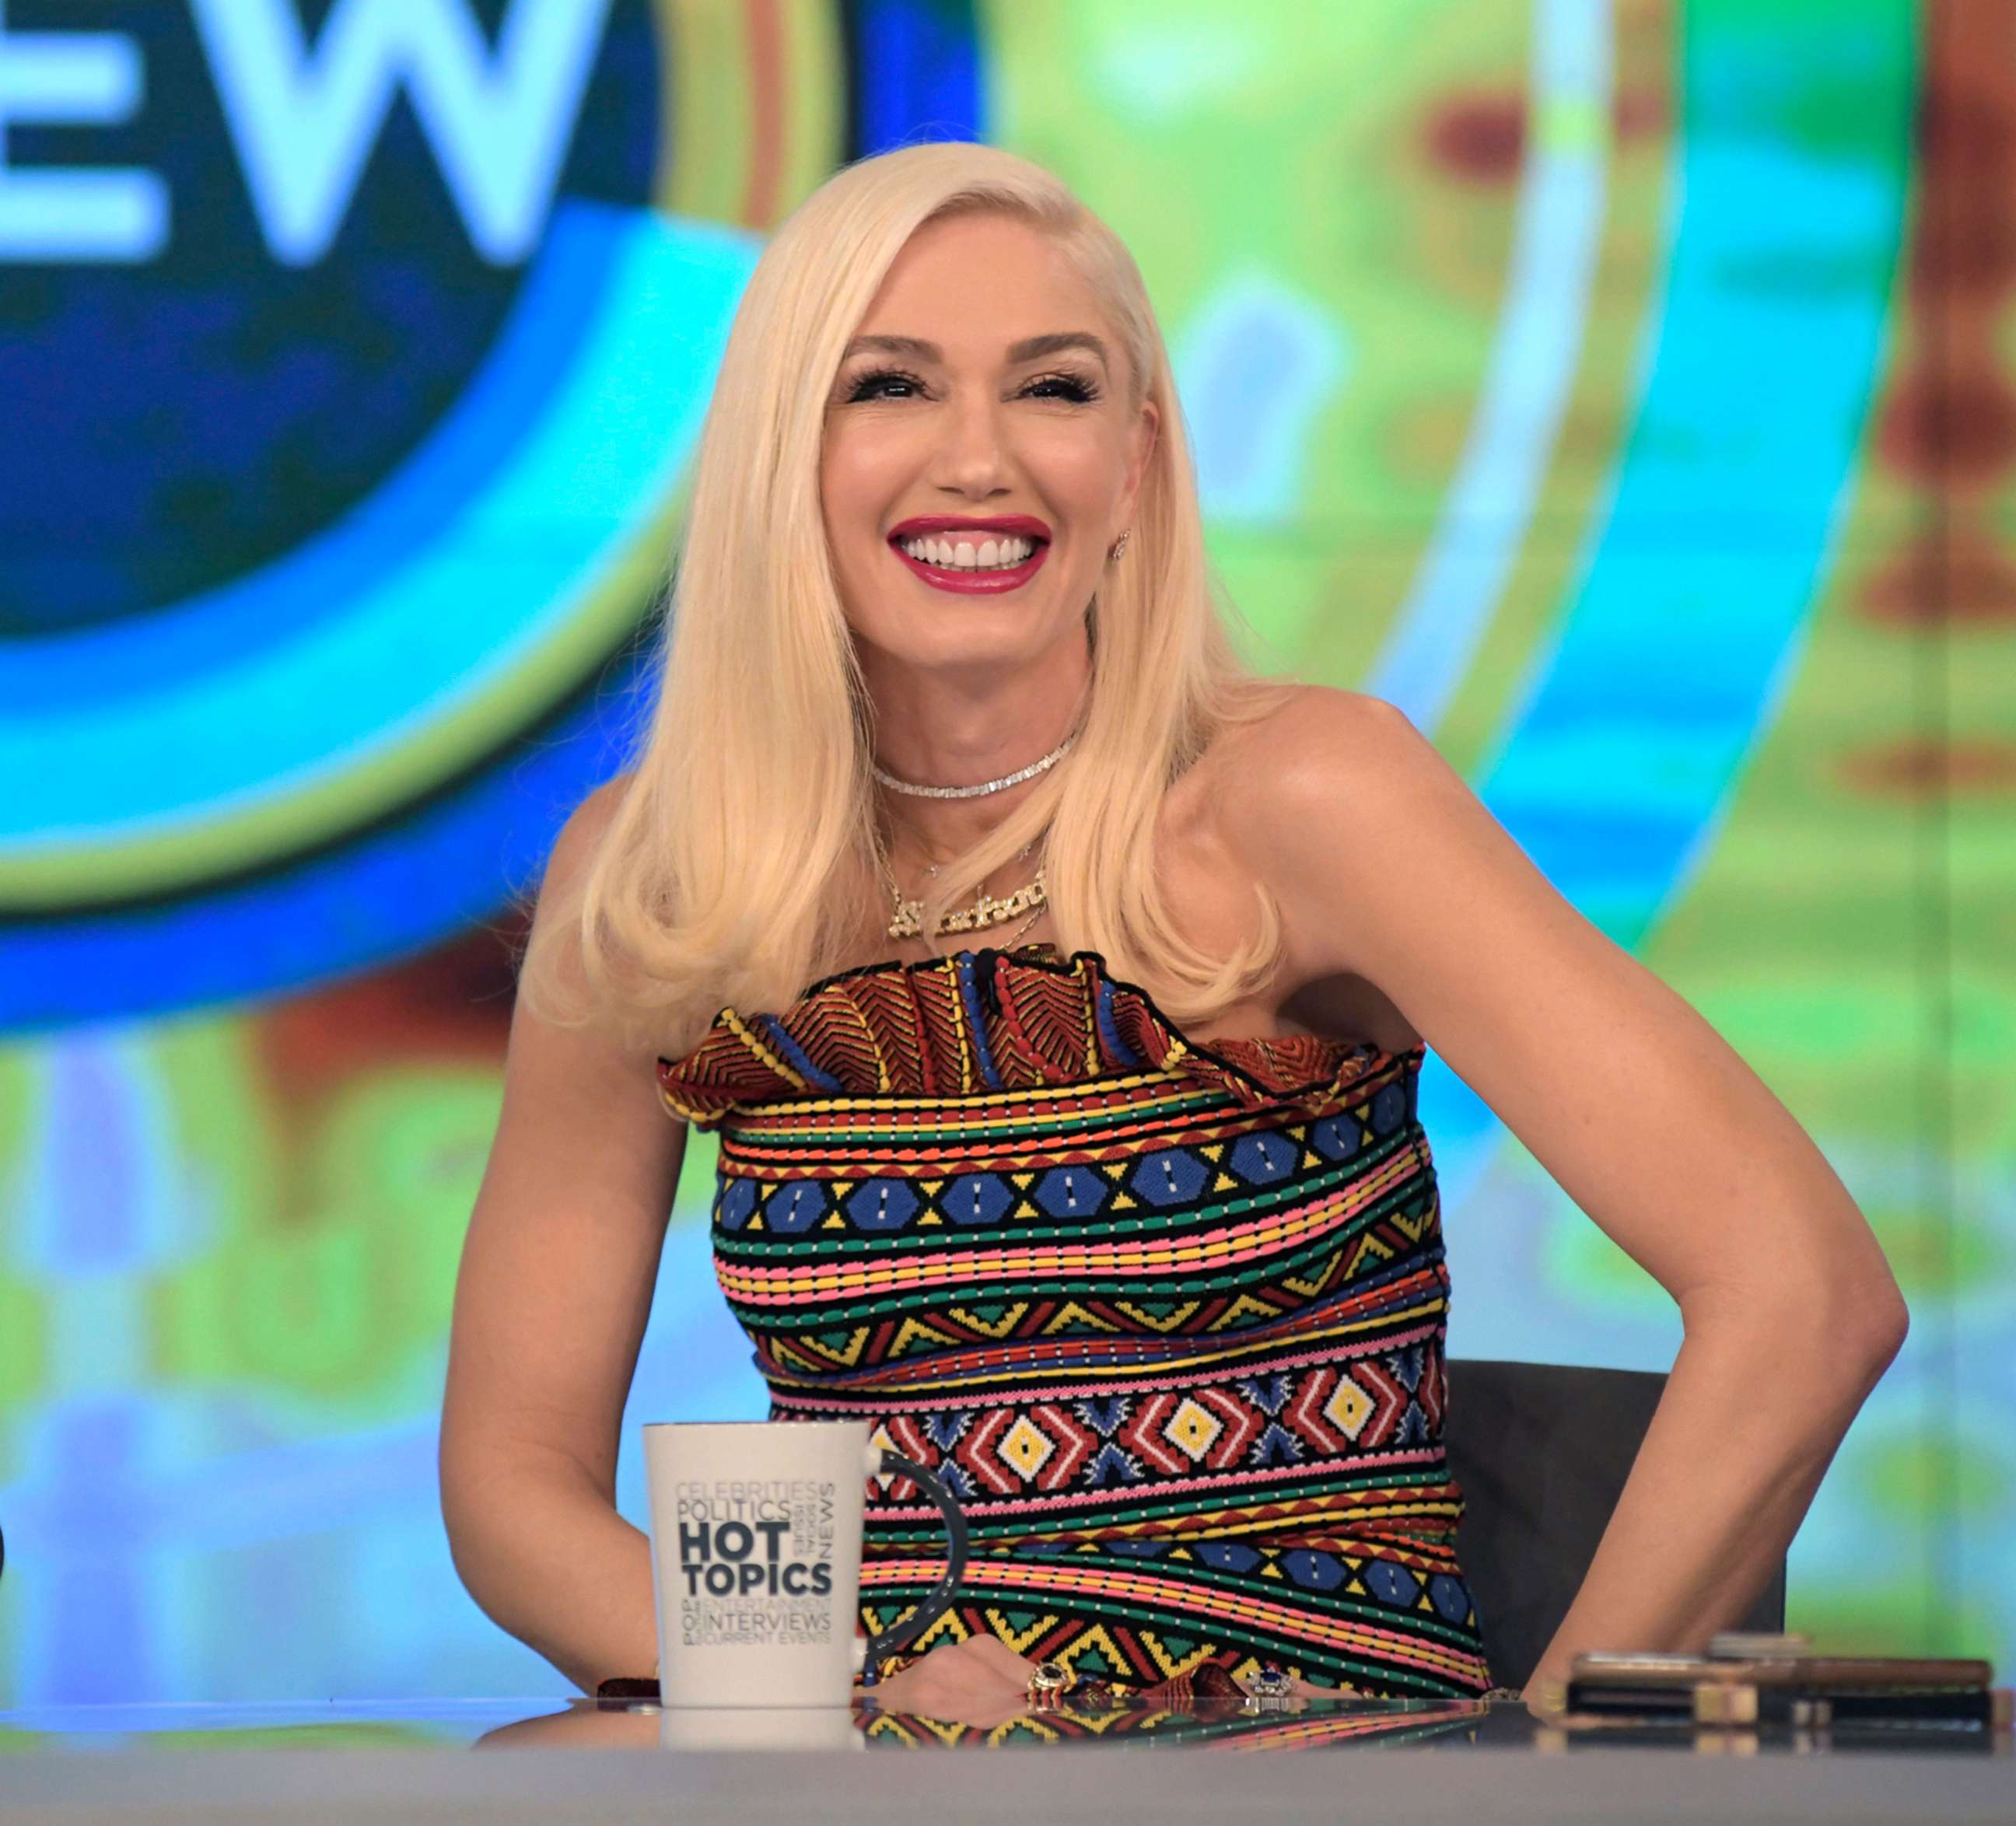 PHOTO: Gwen Stefani guests on ABC's "The View" Tuesday, Sept. 24, 2019.